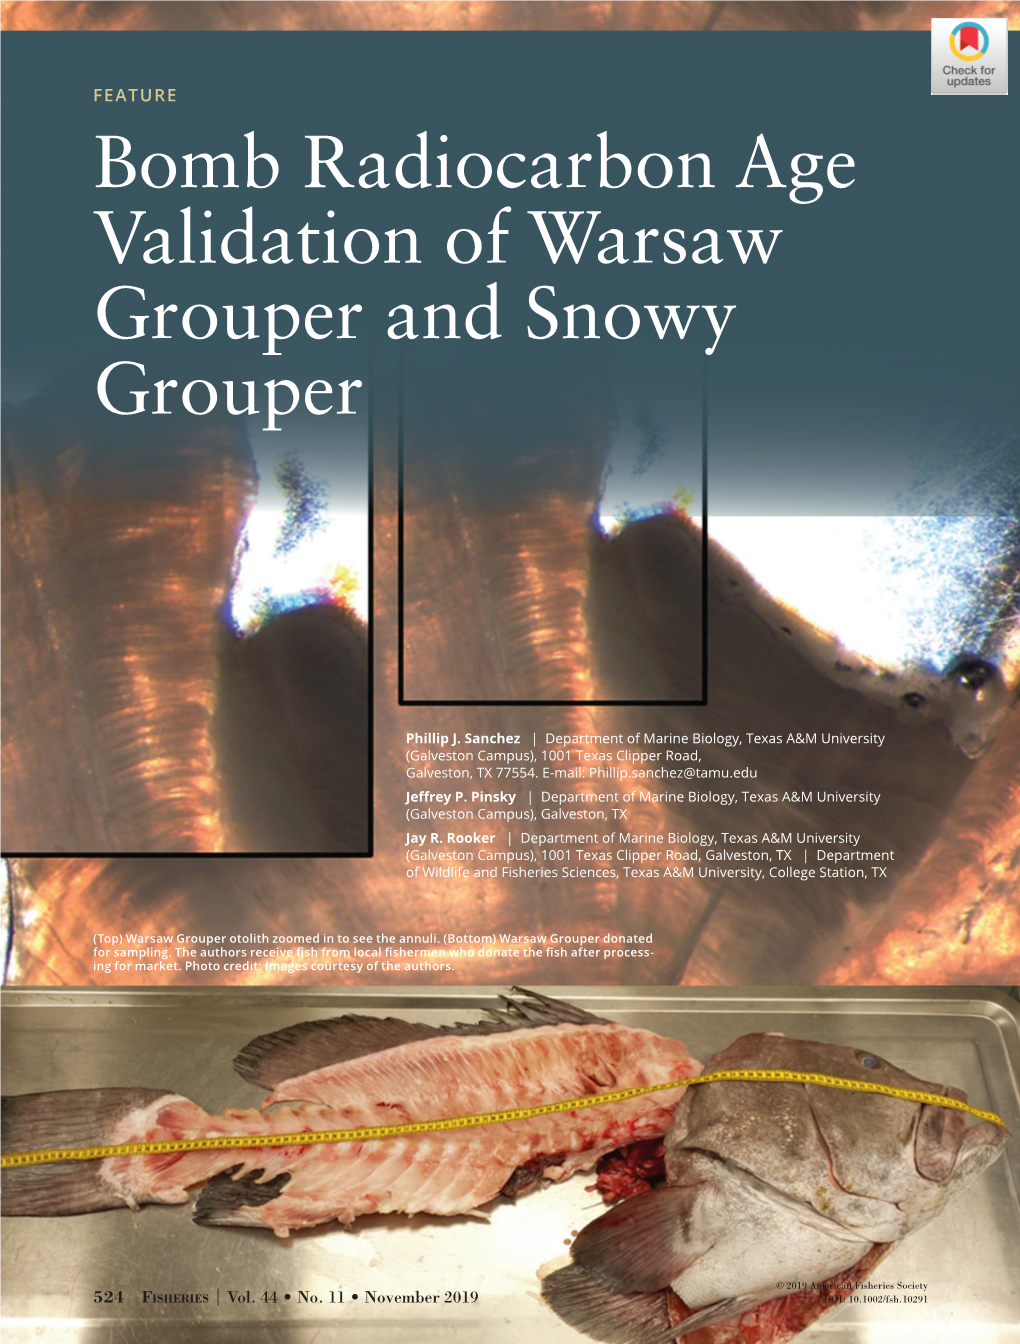 Bomb Radiocarbon Age Validation of Warsaw Grouper and Snowy Grouper